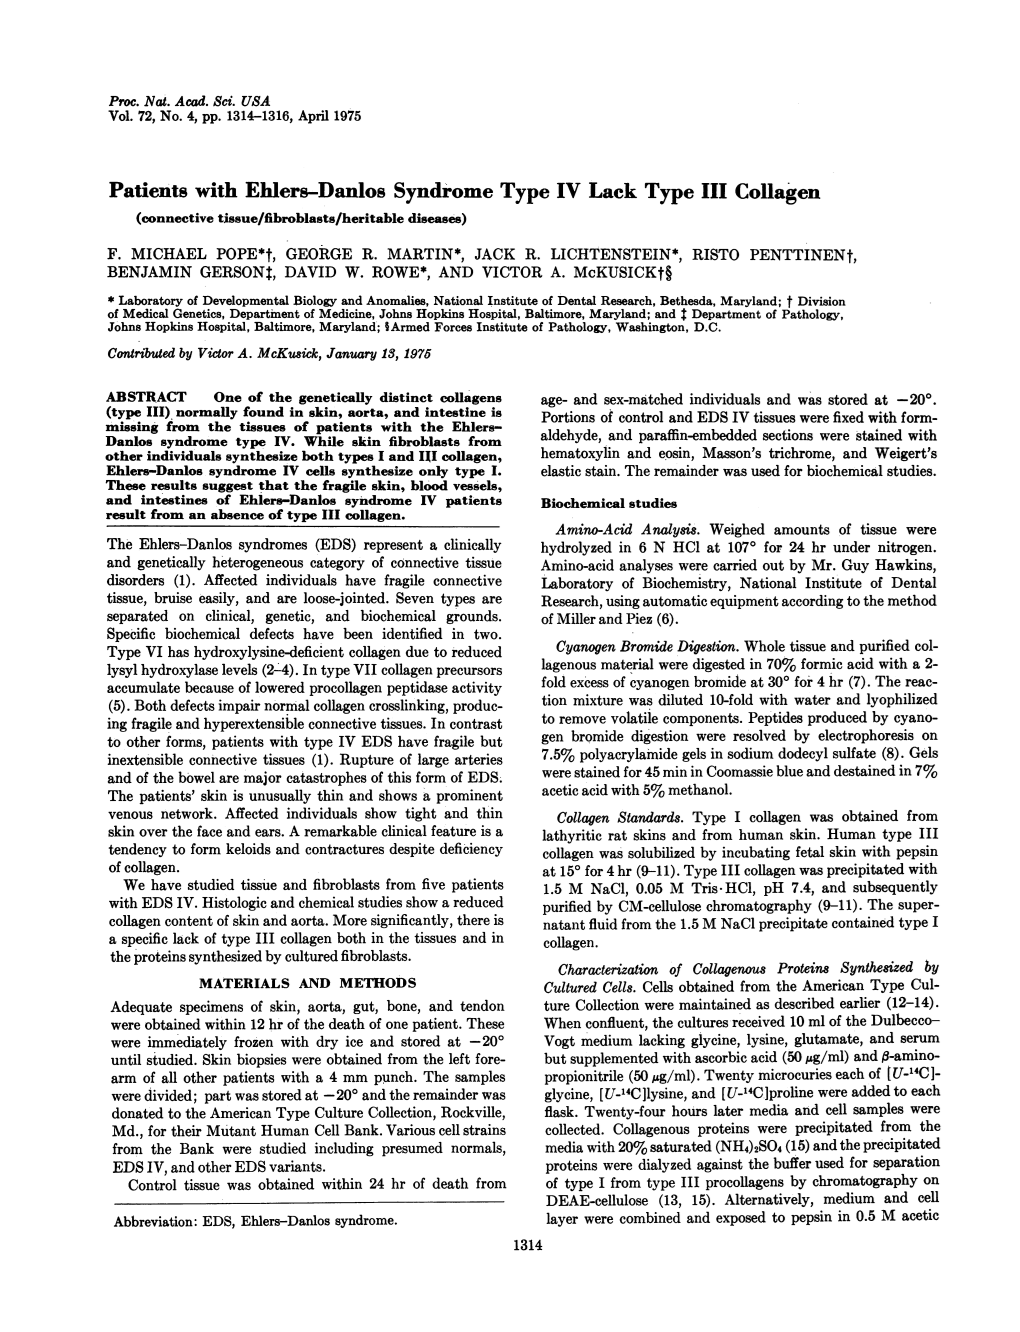 Patients with Ehlers-Danlos Syndrome Type IV Lack Type III Collagen (Connective Tissue/Fibroblasts/Heritable Diseases) F